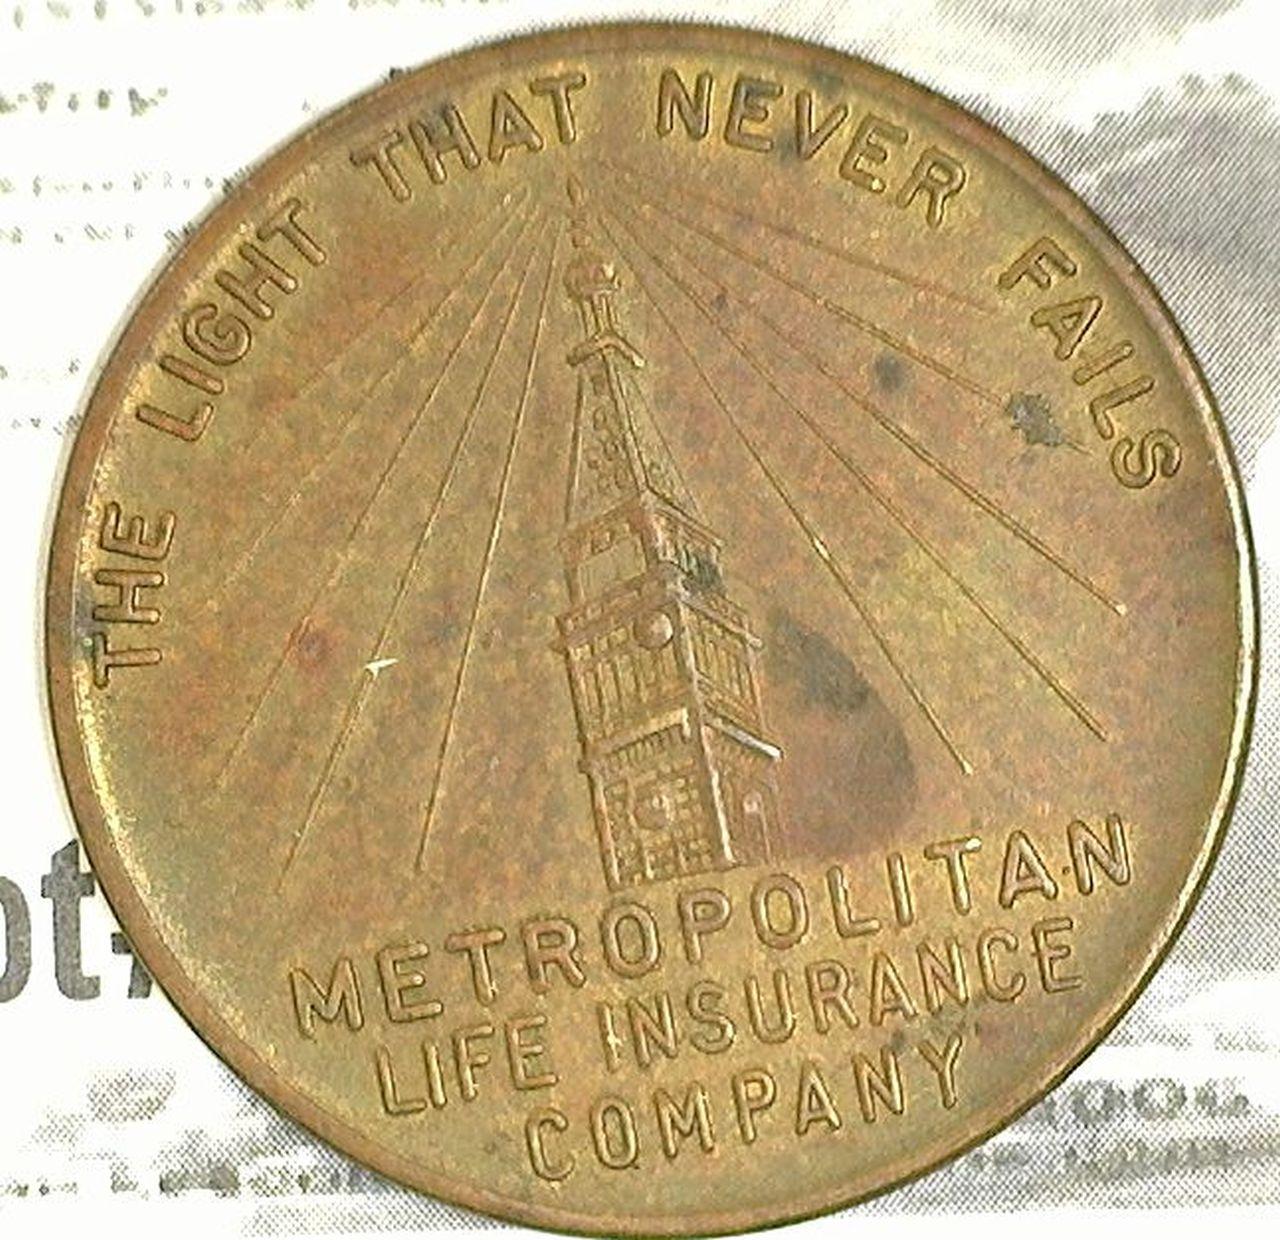 1940 New York Worlds Fair, Met Life Insurance Co., Clines Cornens, New Mexico & Rocky Point Merc. Co